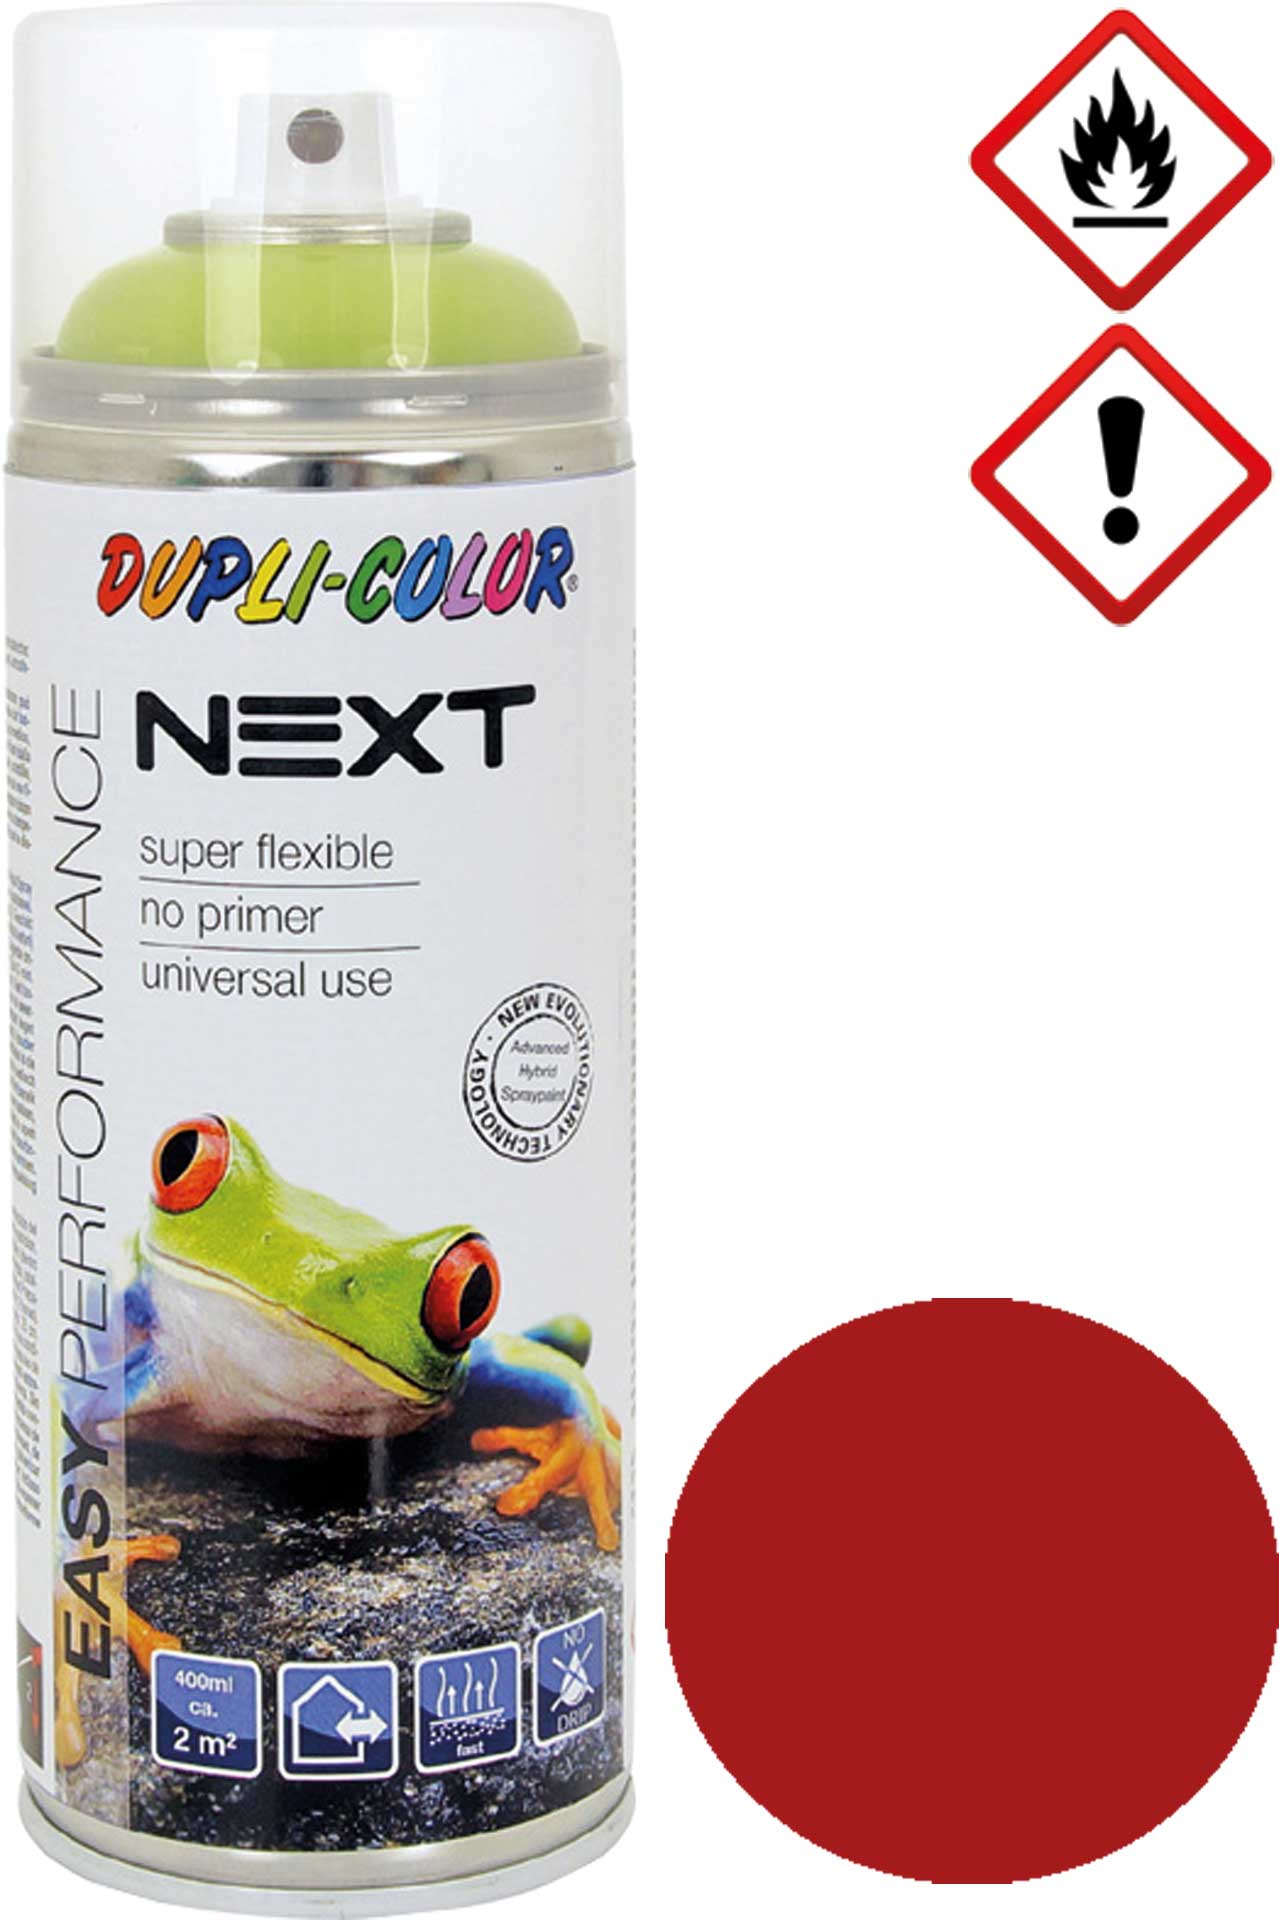 DUPLI-COLOR NEXT RAL 3002 CHIMNEY RED 400ML SPRAY PAINT